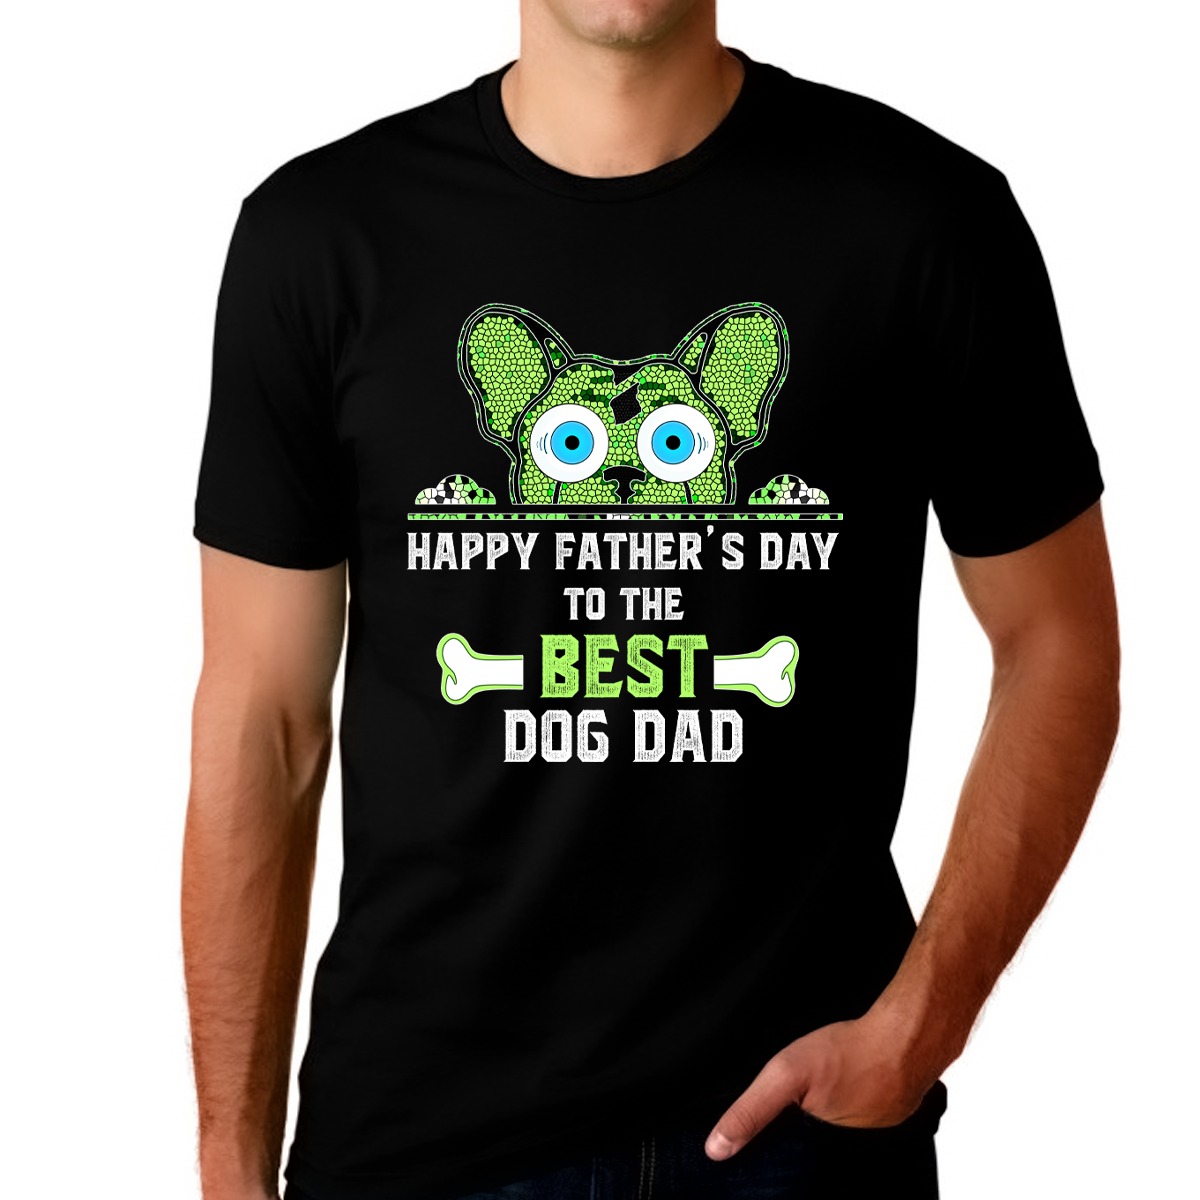 Best Dog Dad Fathers Day Shirt for Men, Funny Dad Shirts, Father's Day Gift Shirt, Funny Dad Shirt